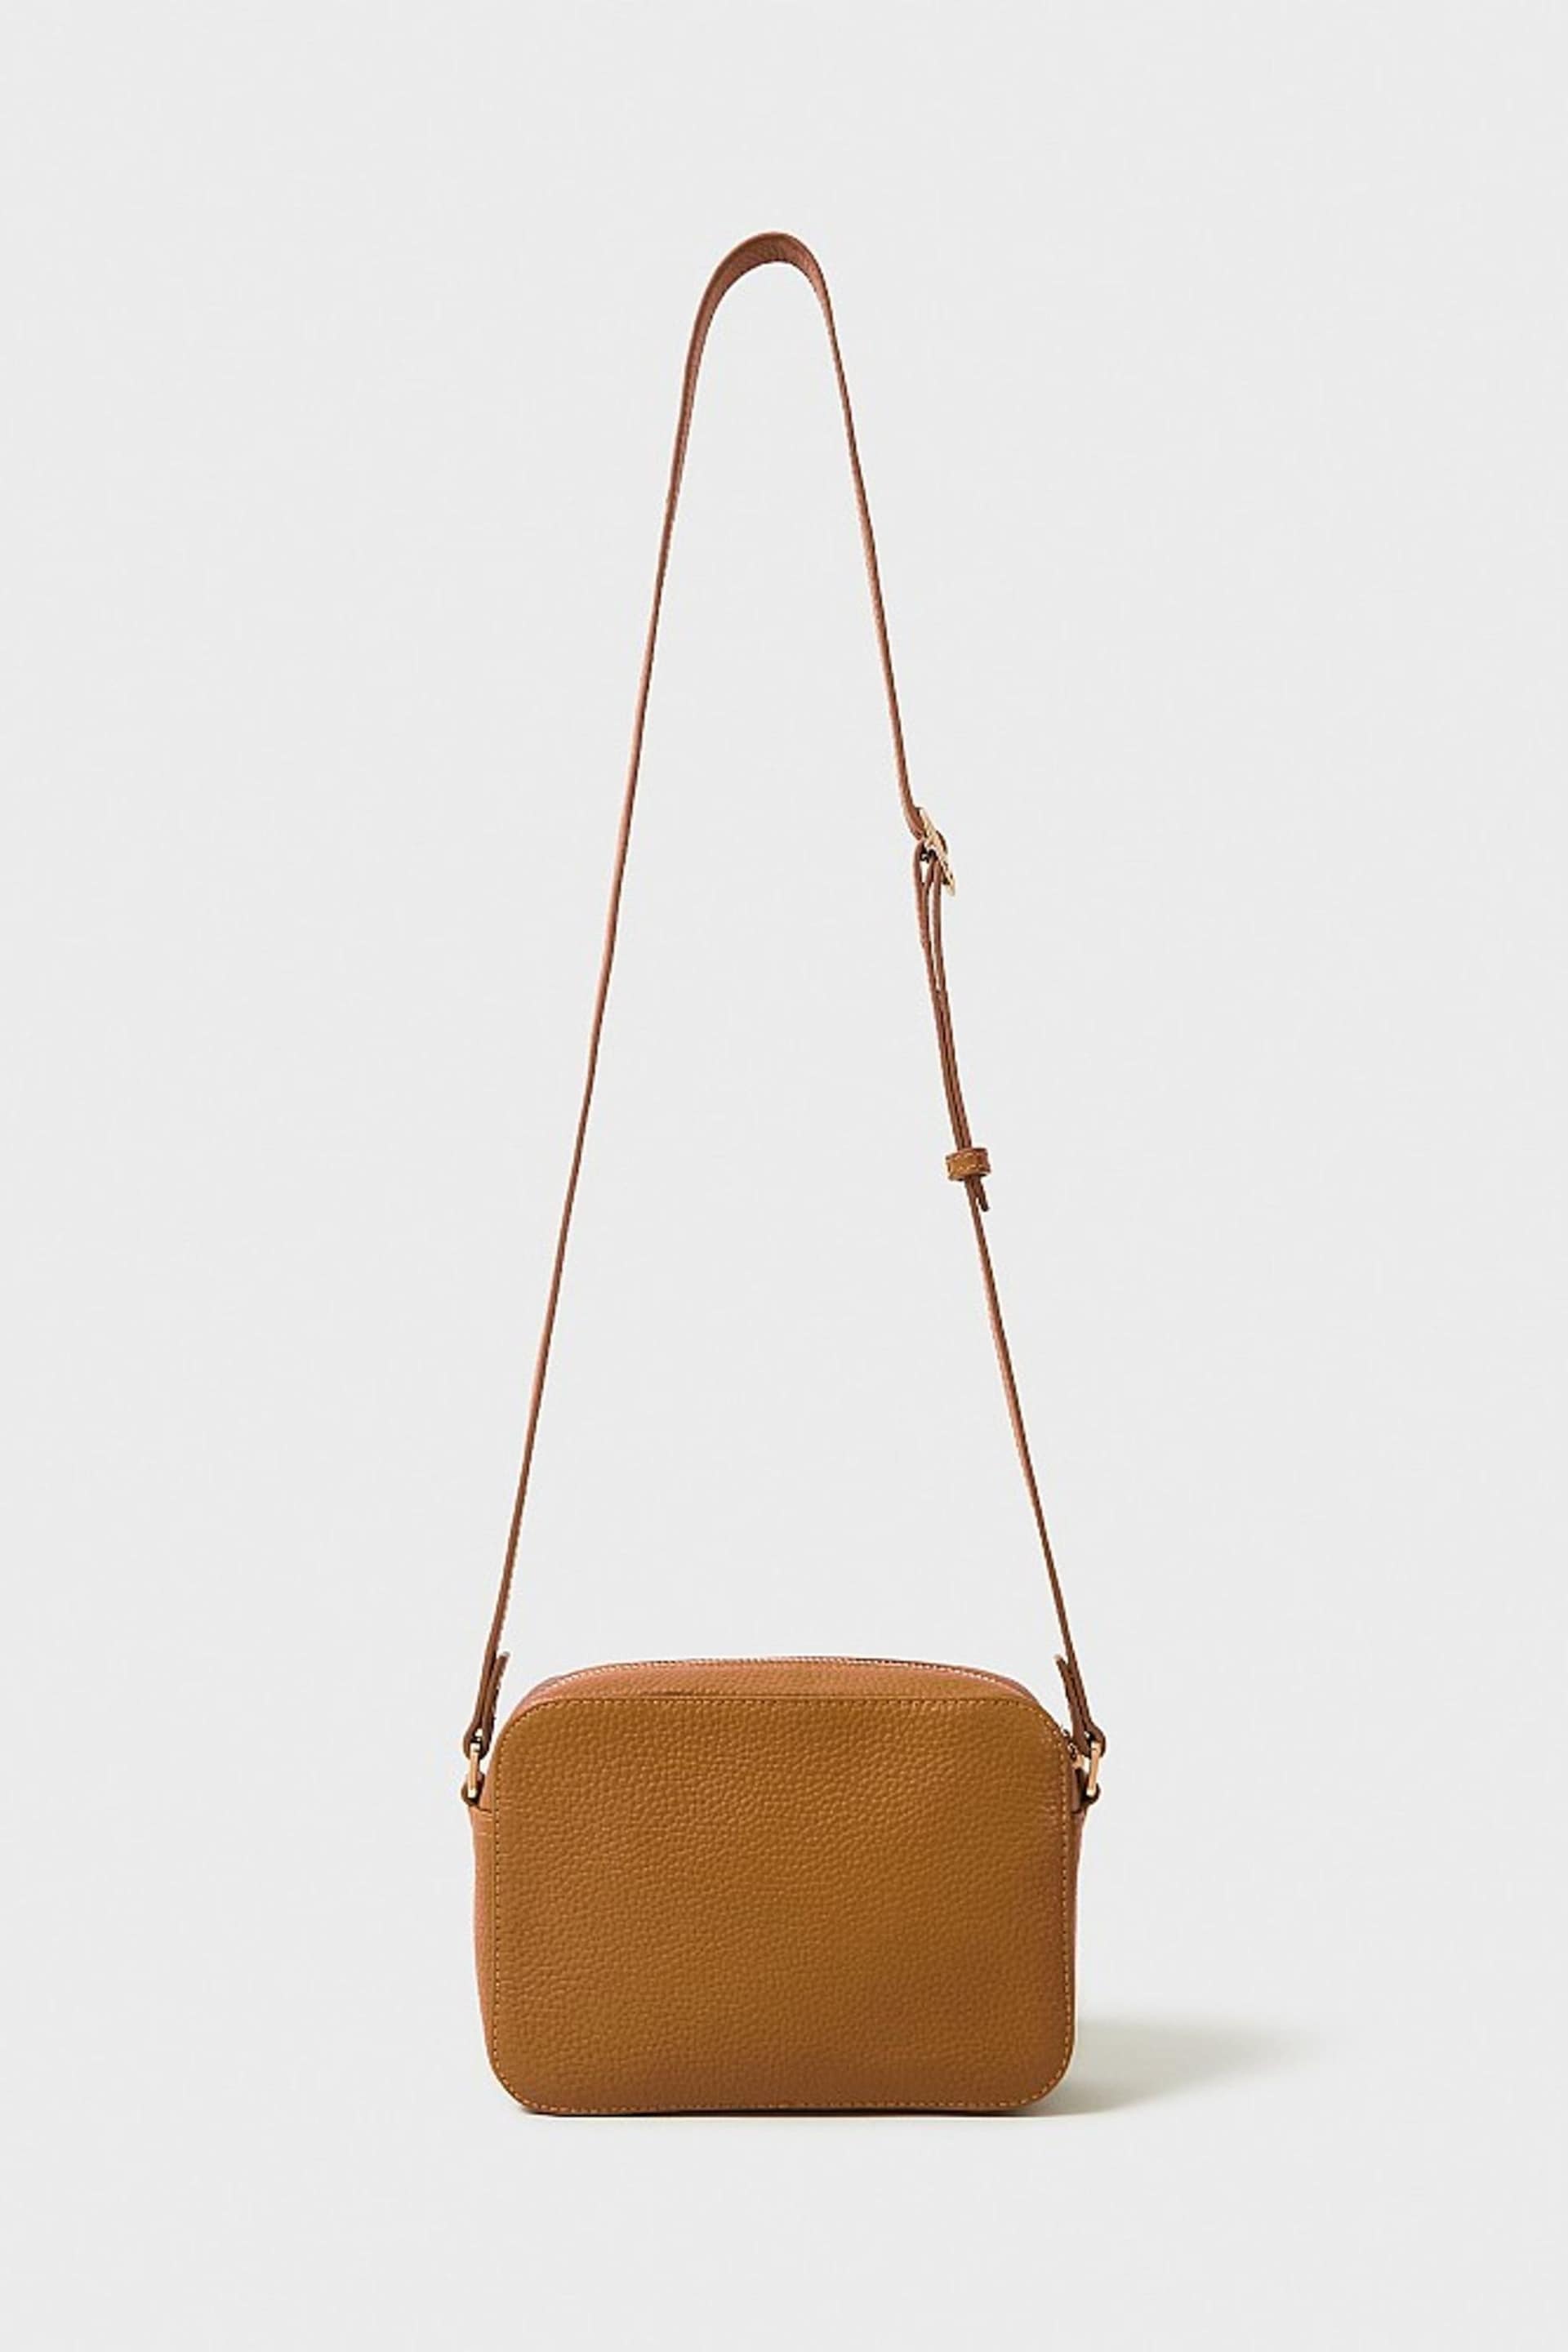 Crew Clothing Company Leather Cross-Body Brown Bag - Image 4 of 5